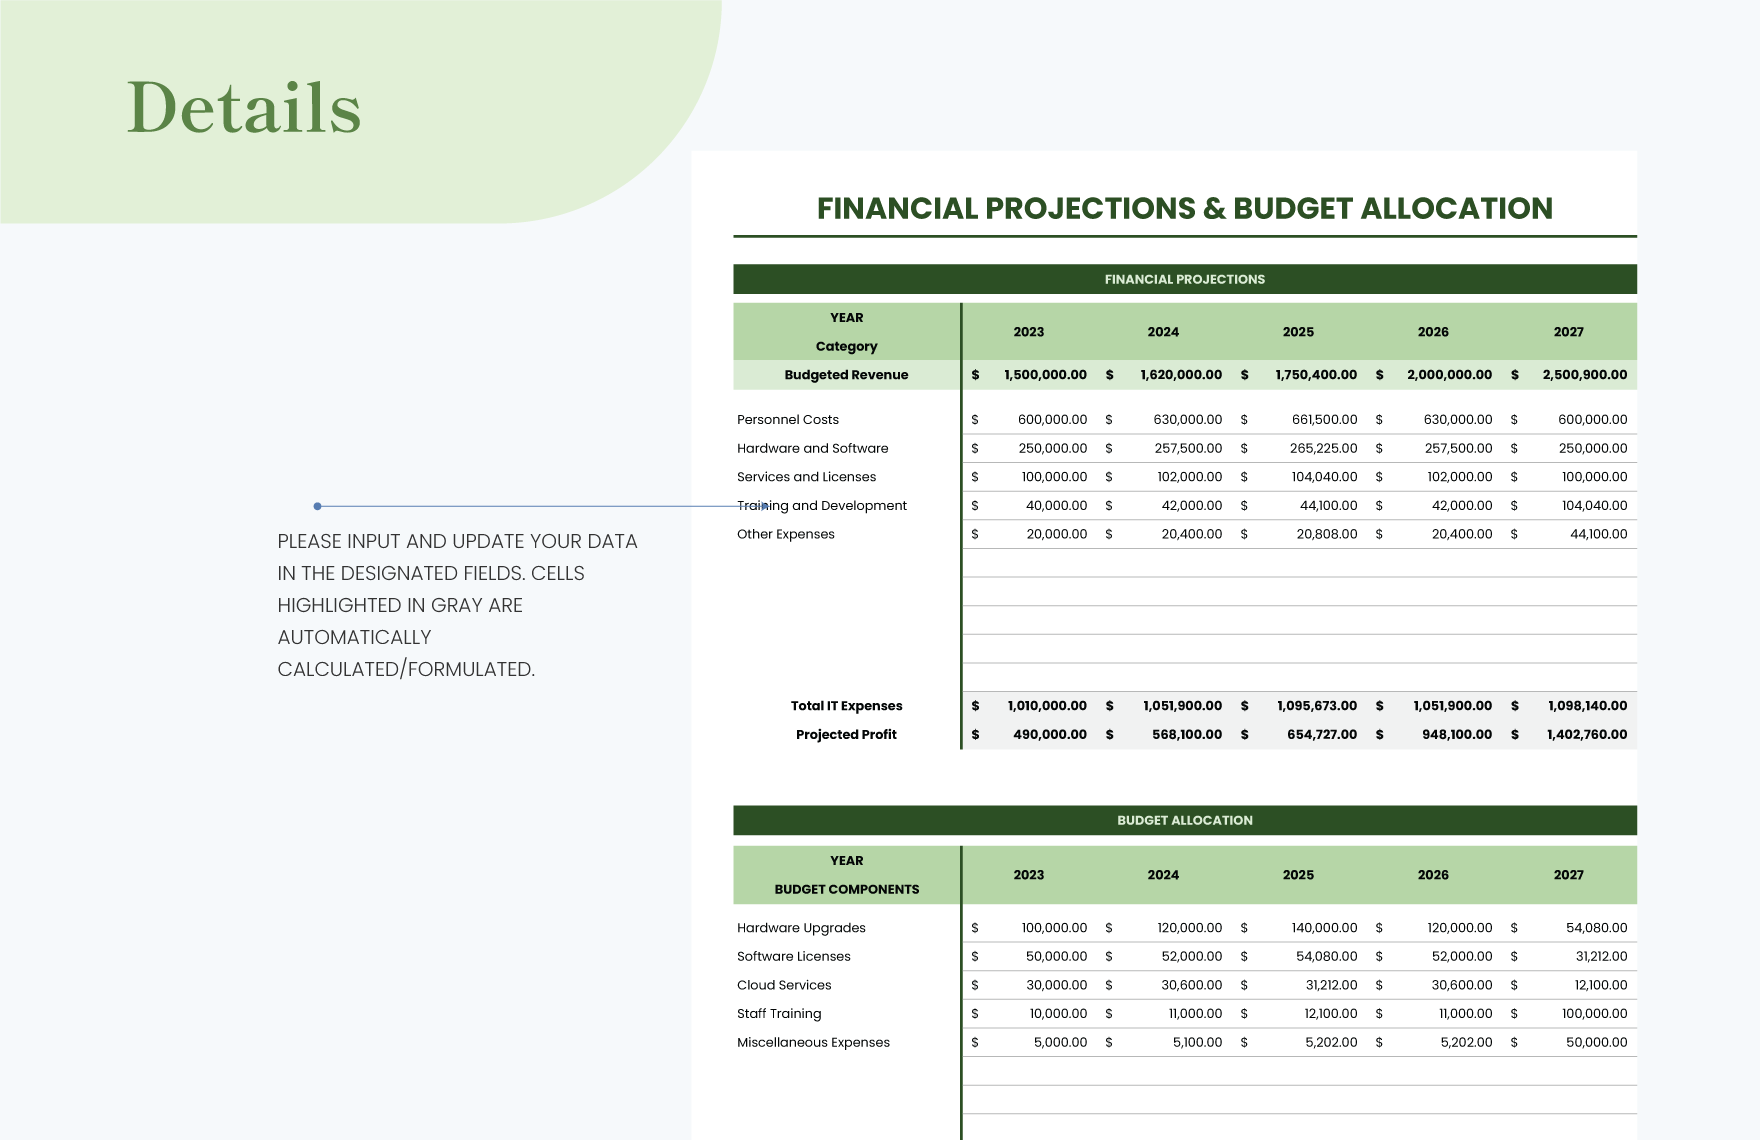 IT Financial Projections Sheet Template